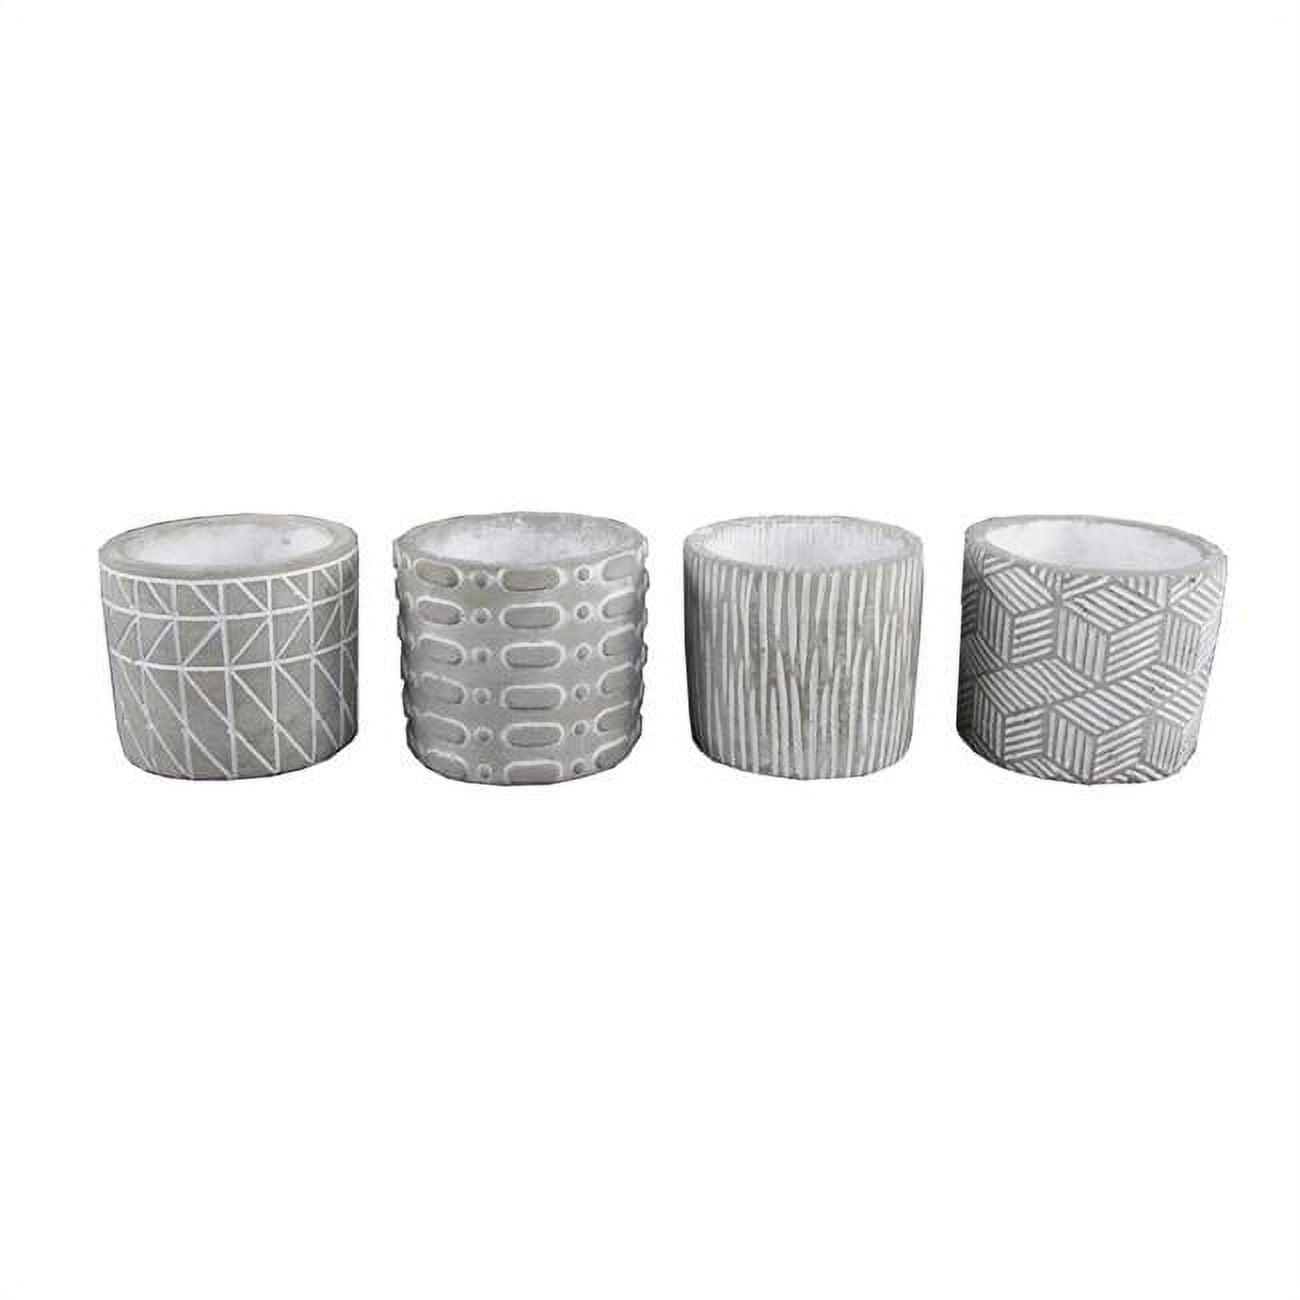 Artisan-Crafted Gray Cement Indoor Planter Set, 4x4x4